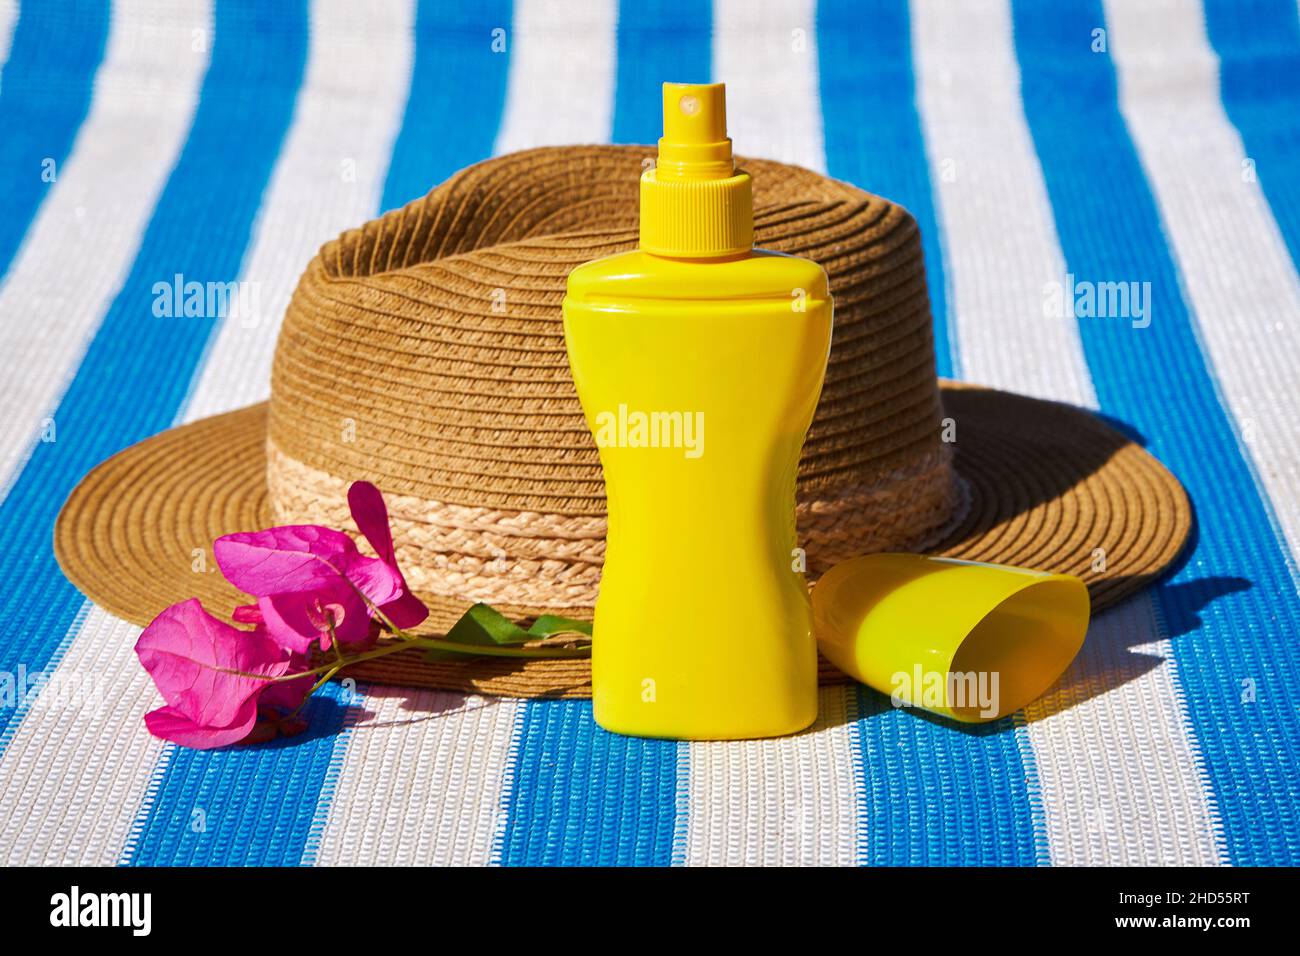 Yellow sunscreen cream bottle for skin protection, sun glasses, straw hat and beach towel on the blue striped mattress. Summer recreation concept Stock Photo